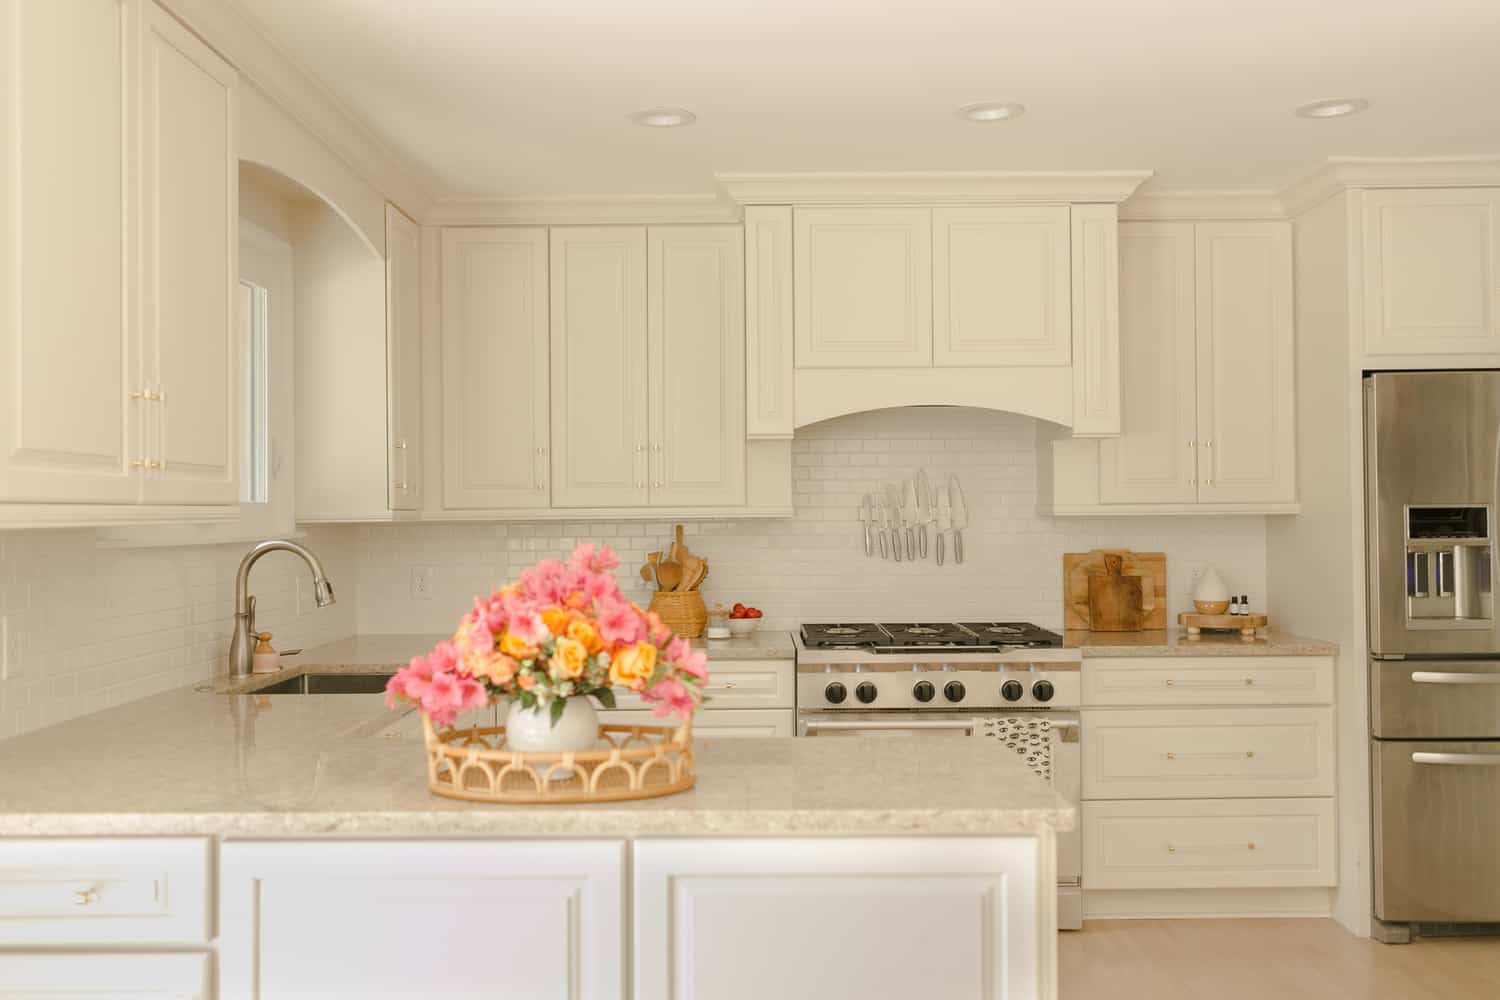 Best Paint For Kitchen Cabinets, Do Professionally Painted Kitchen Cabinets Hold Up